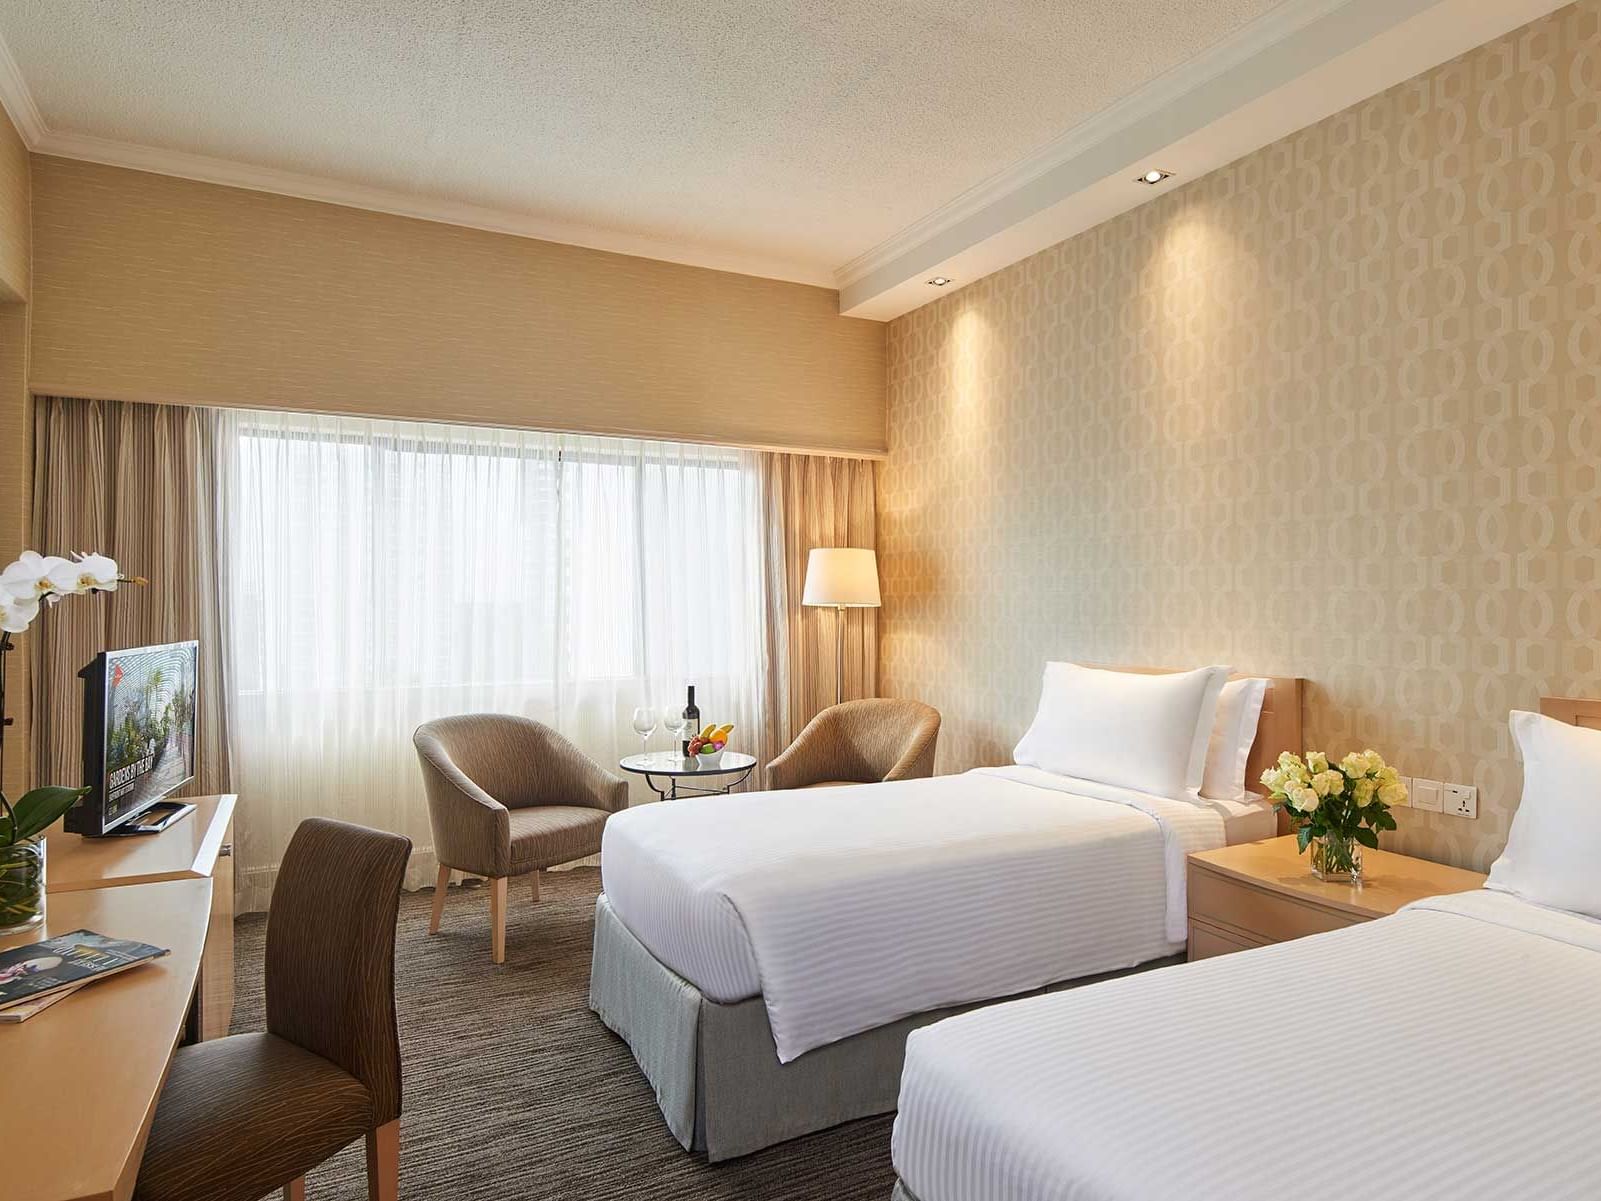 Beds & furniture in Superior Twin Room at York Hotel Singapore